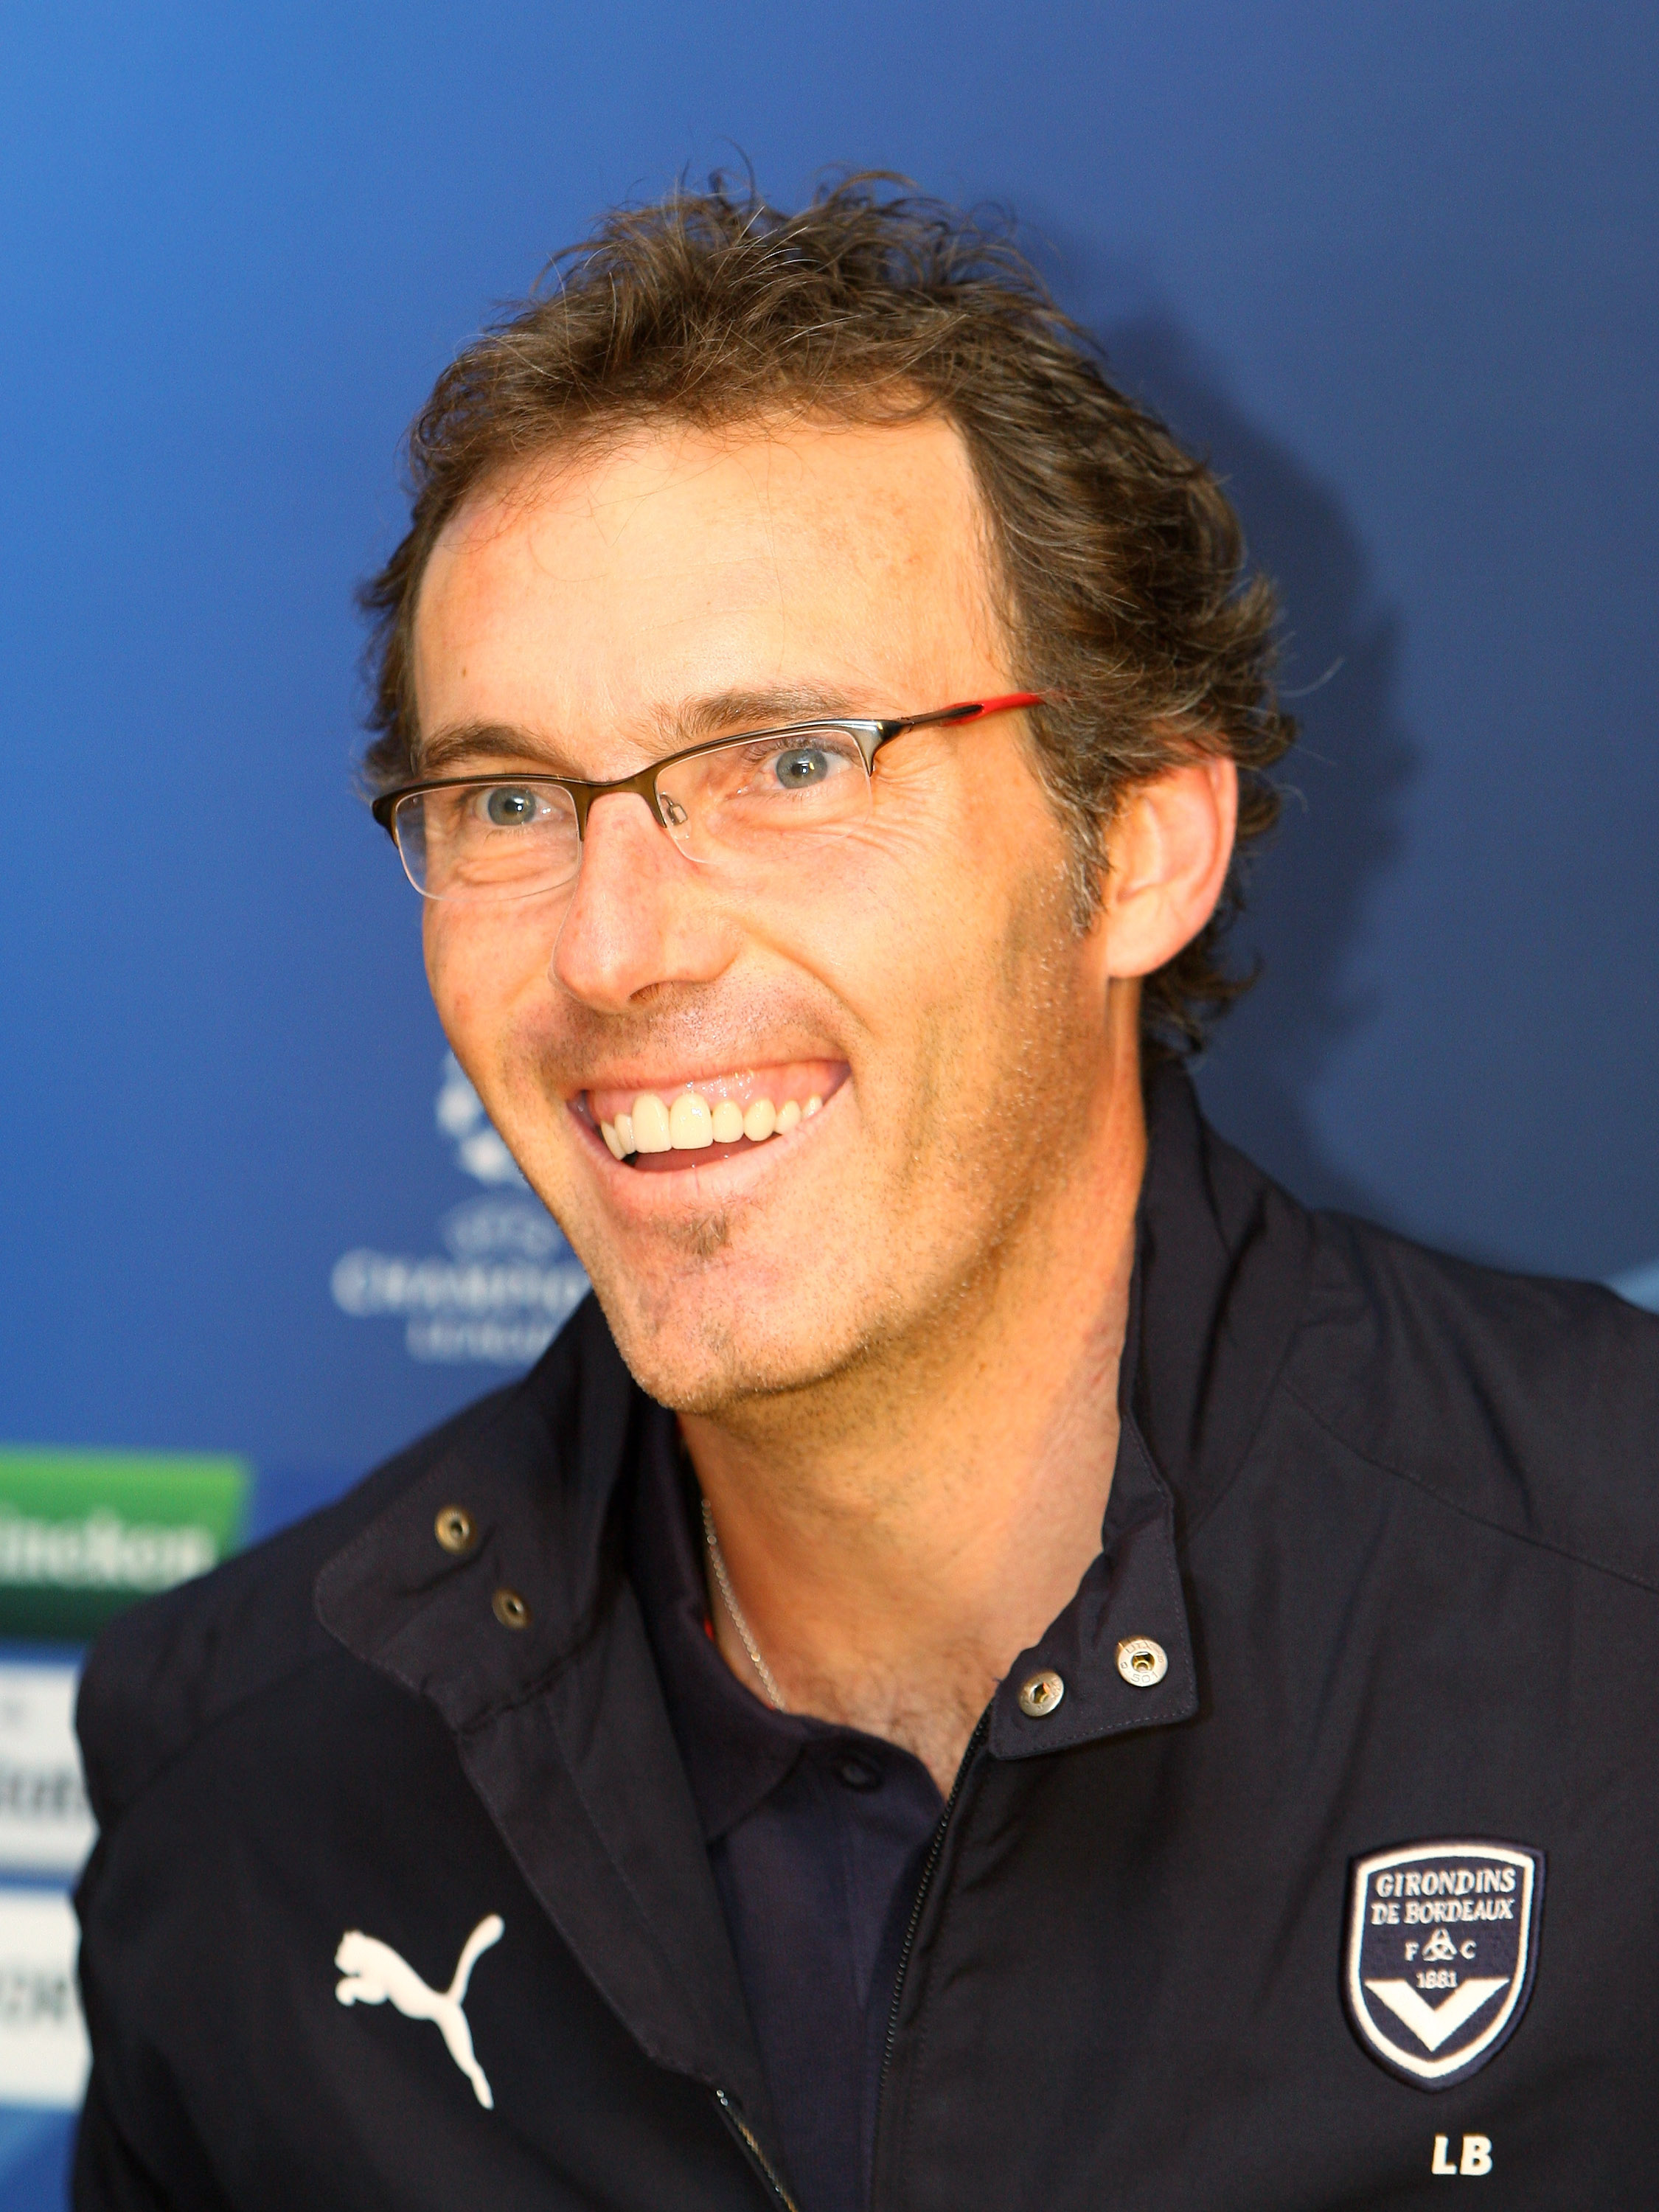 LONDON - SEPTEMBER 15:  Laurent Blanc, Manager of Bordeaux, smiles during a press conference before the UEFA Champions League match between Chelsea and Bordeaux, at Stamford Bridge on September 15, 2008 in London, England.  (Photo by Phil Cole/Getty Image